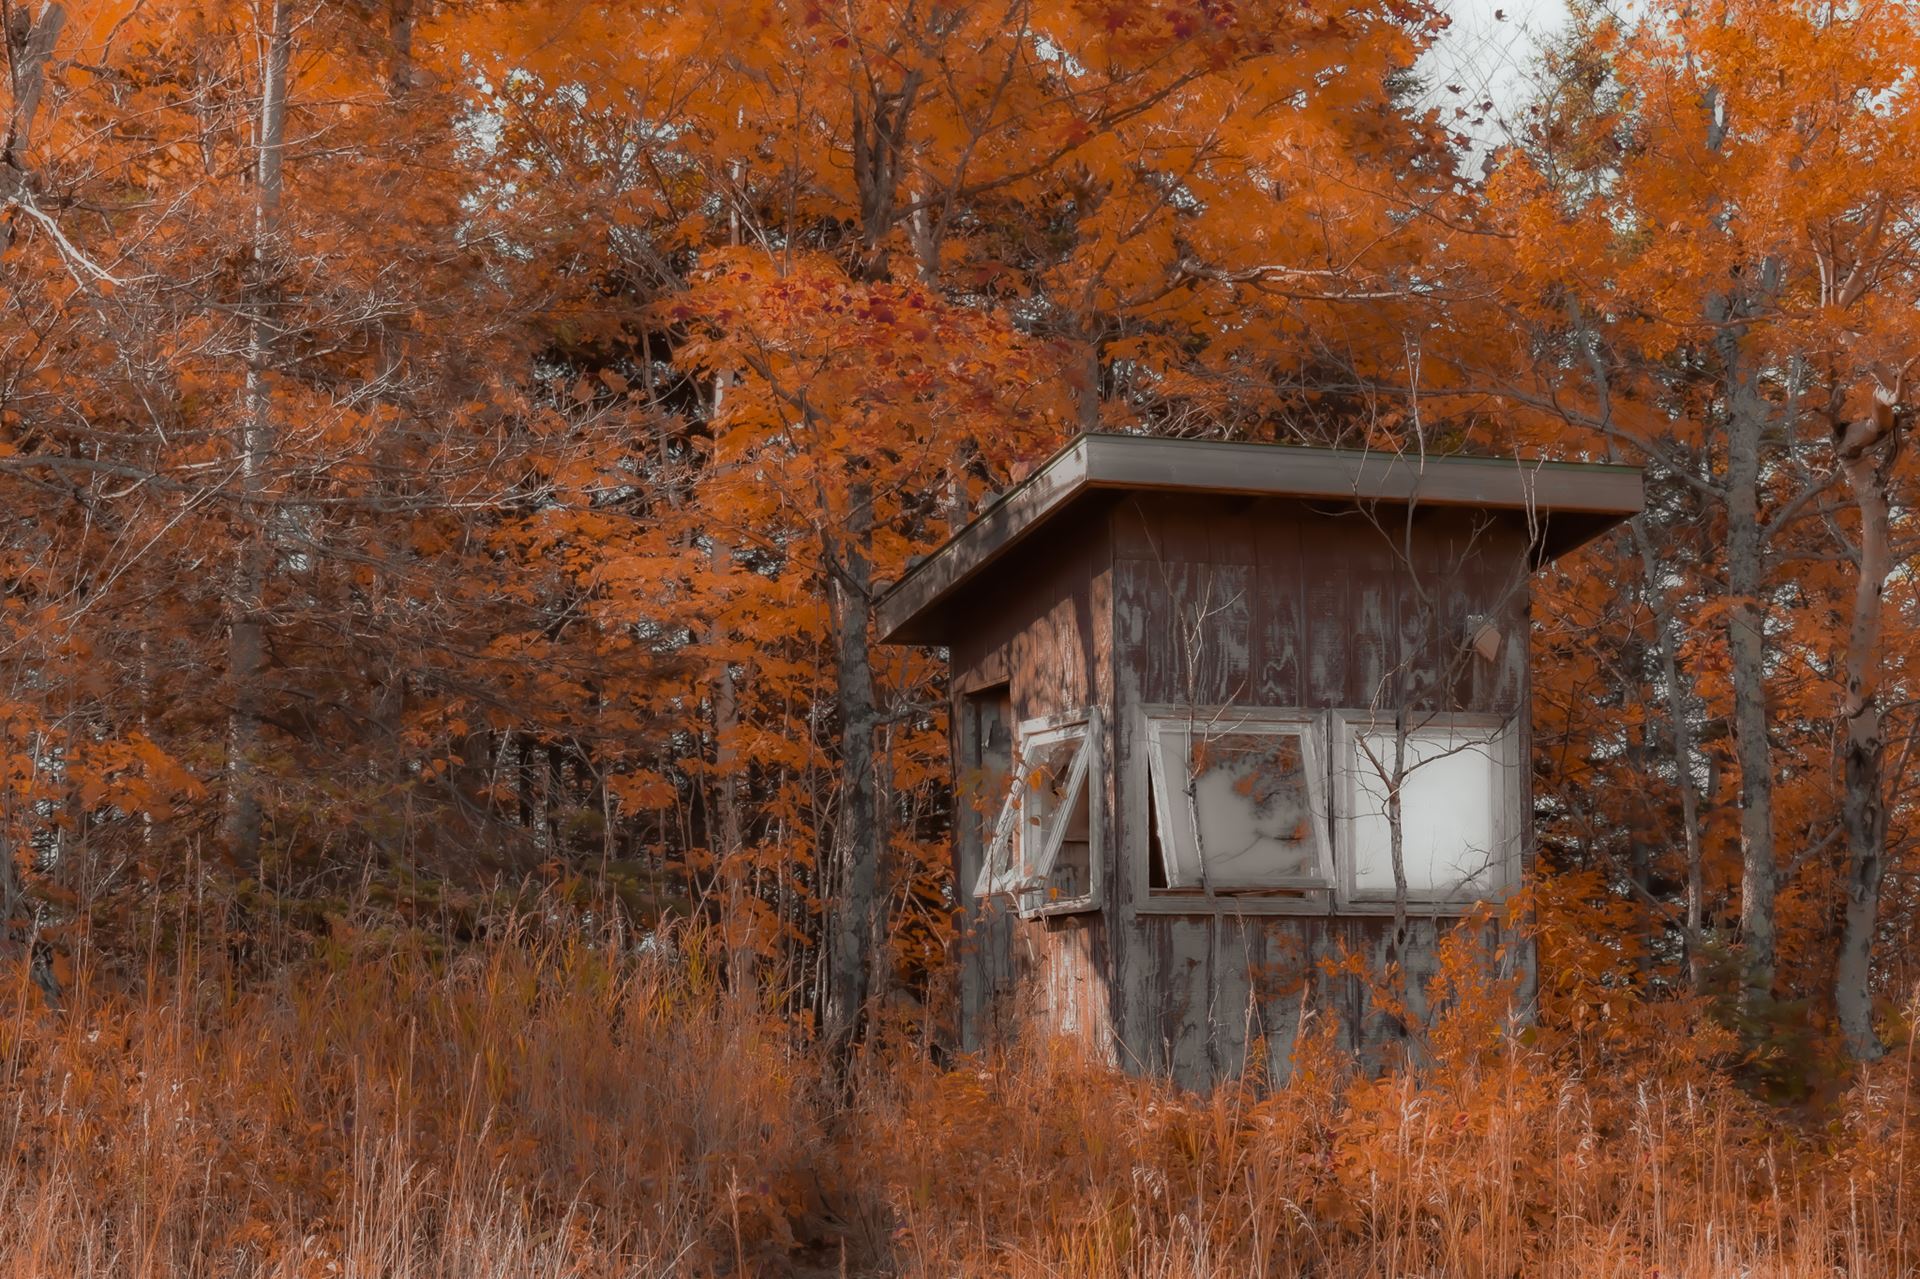 Small building exterior in forest with orange foliage. Noah Uphus, “Hallucinations”